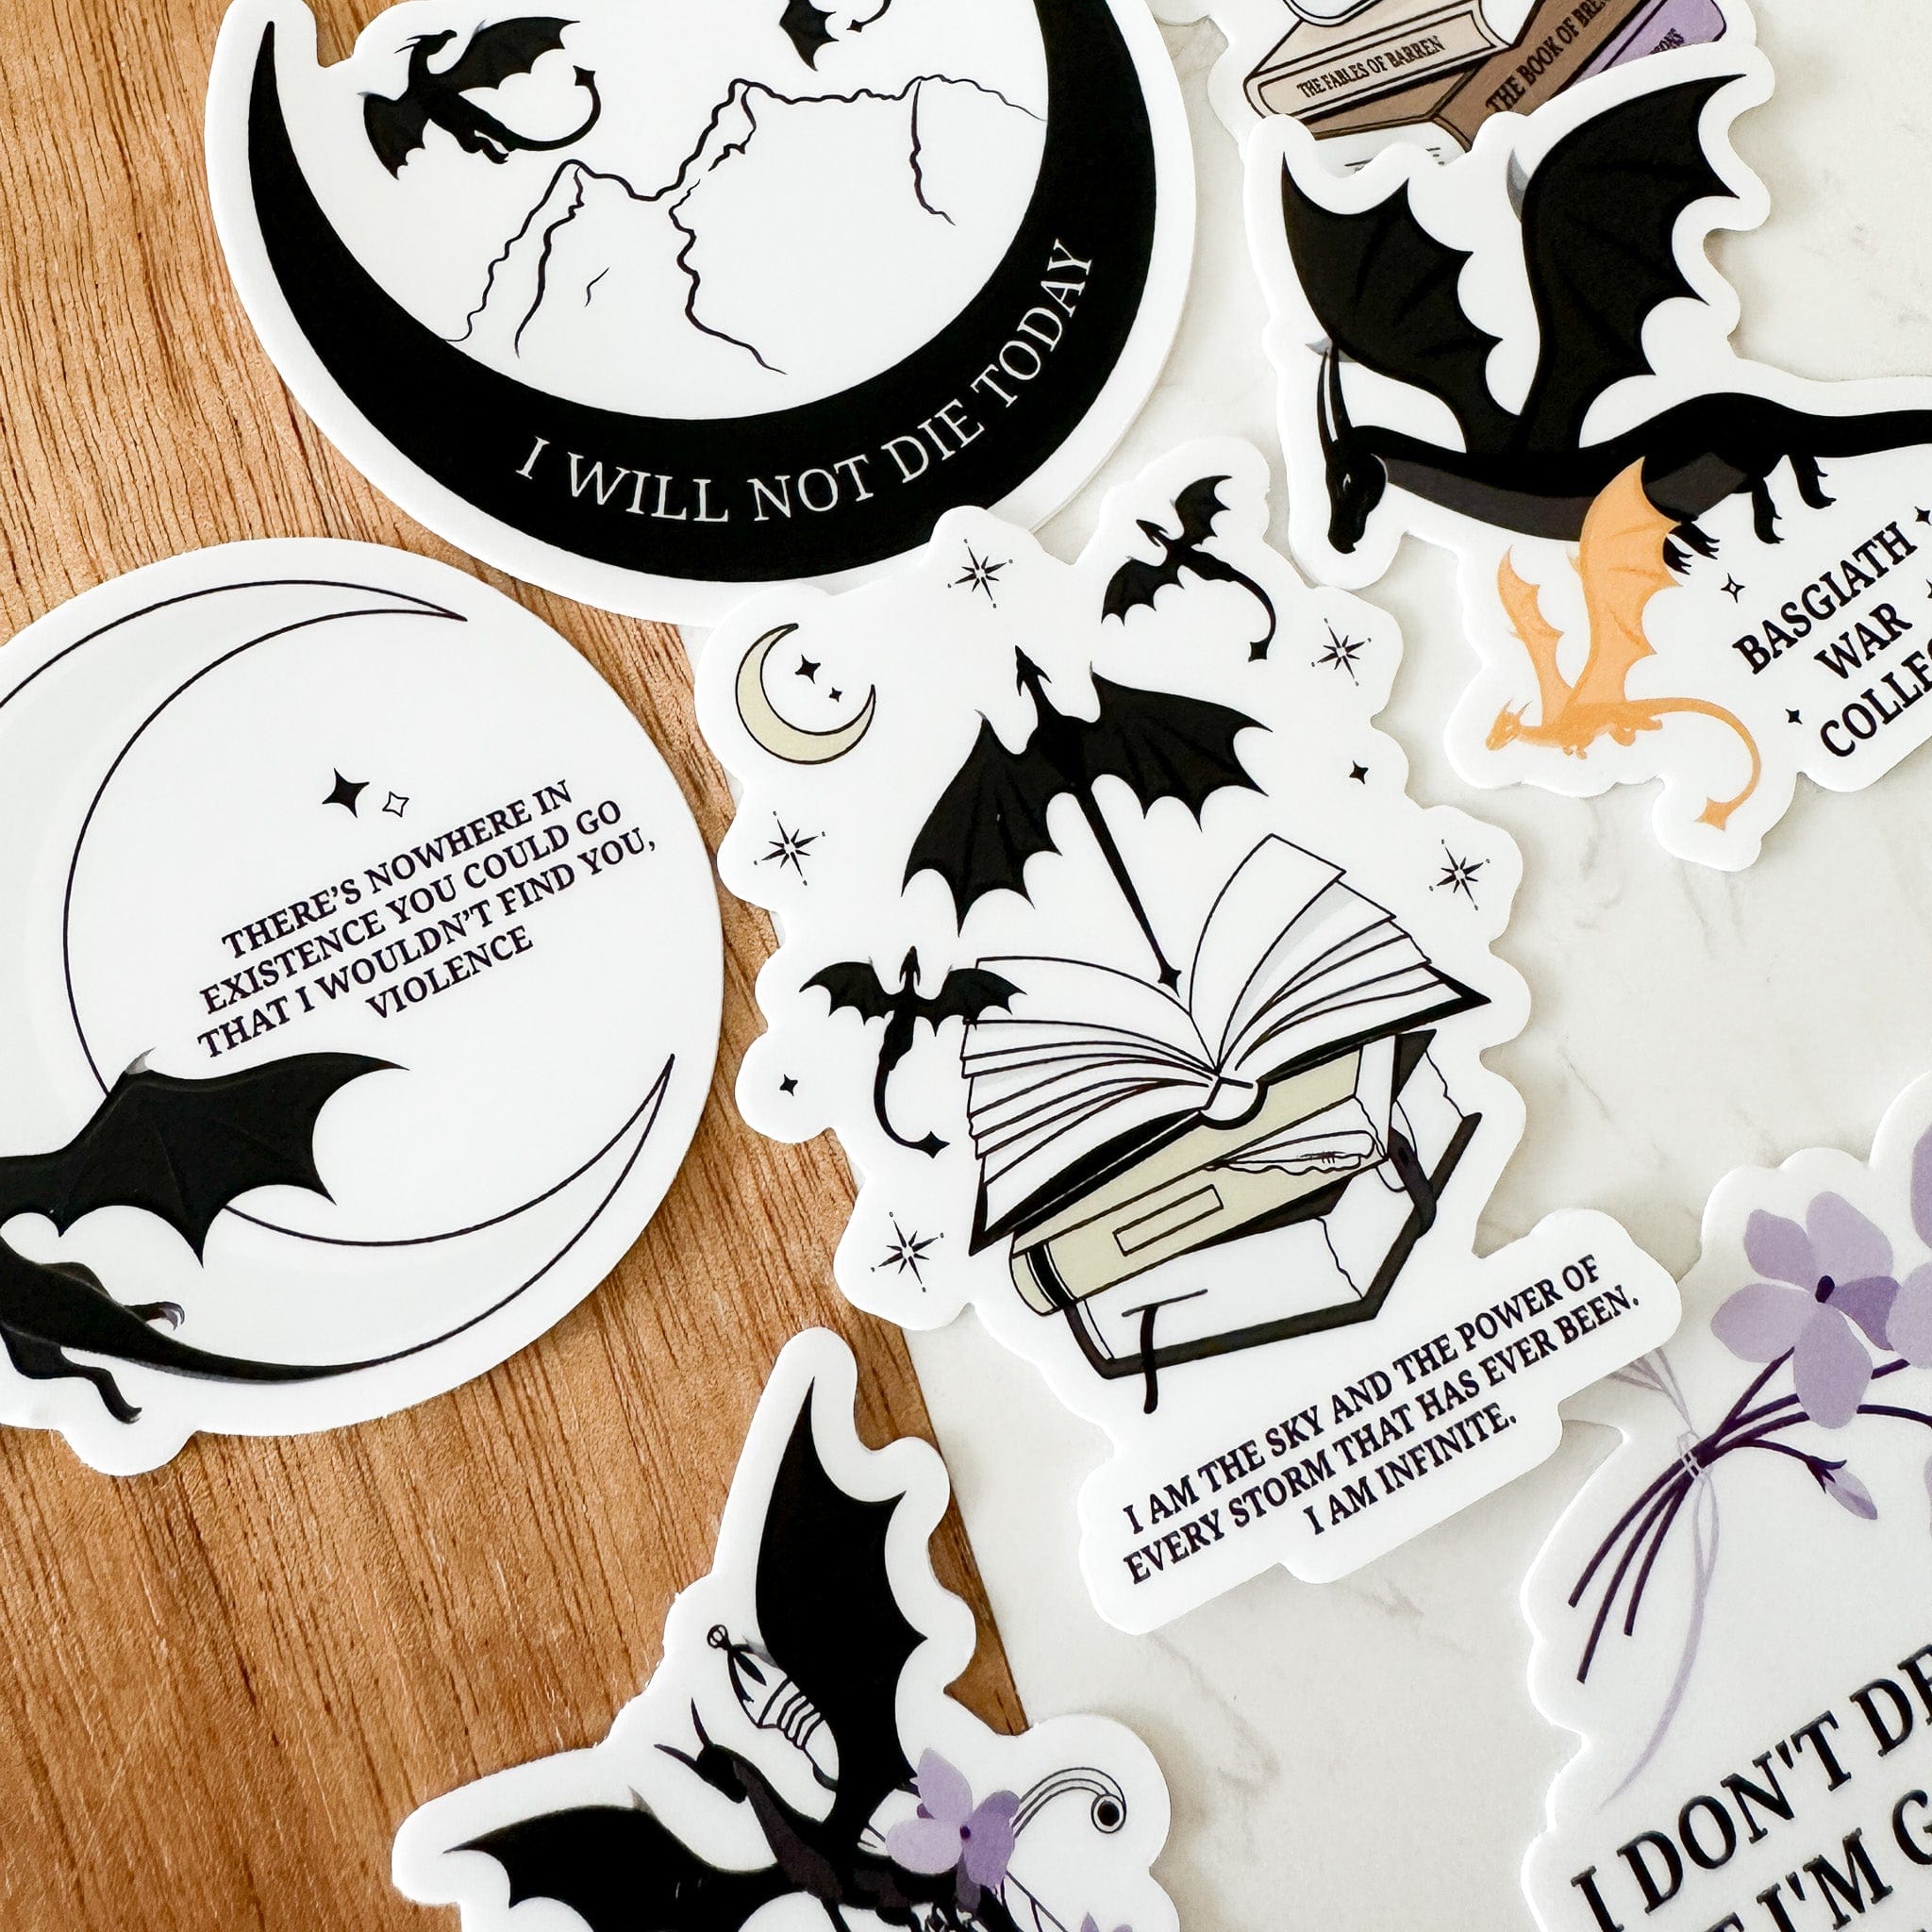 Fourth Wing Sticker Bundle | Officially Licensed